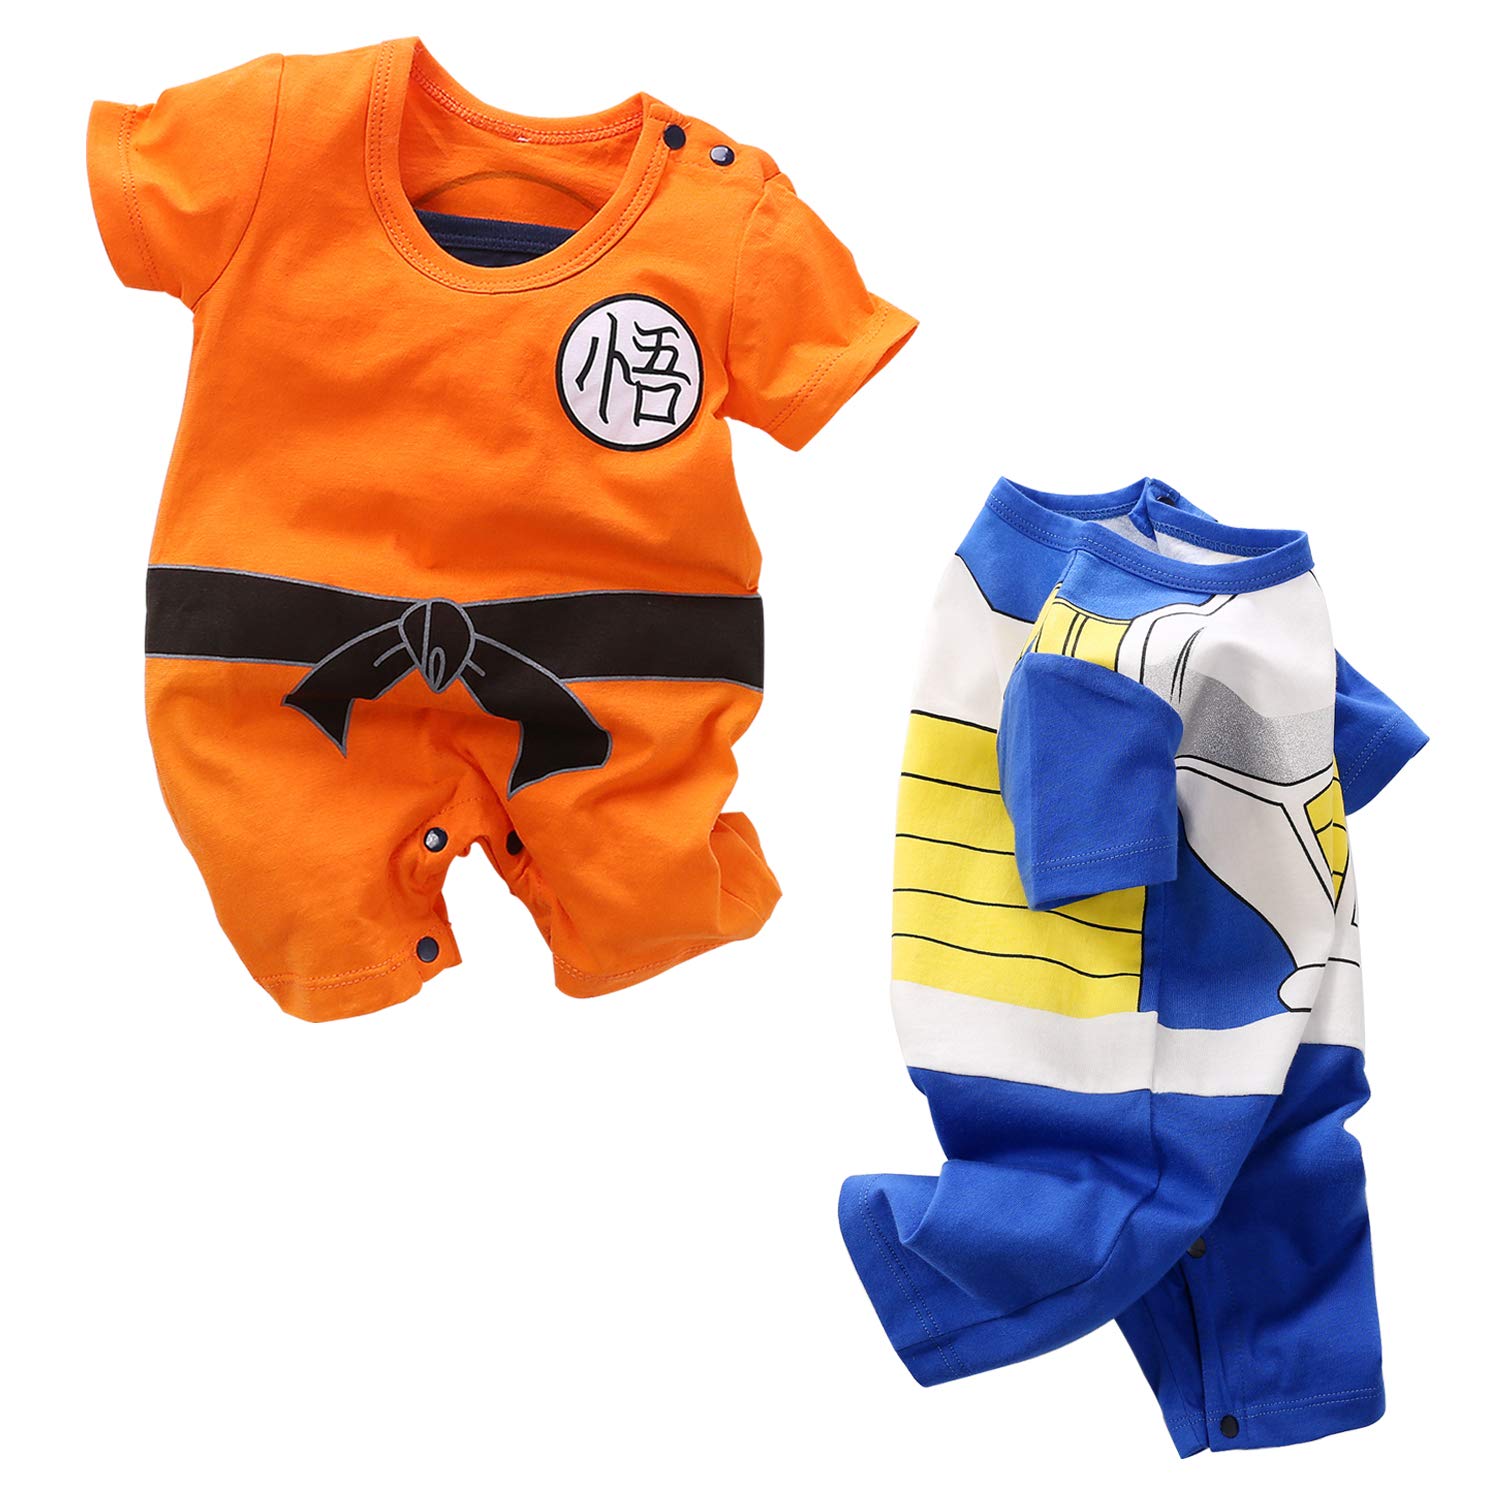 YFYBaby Baby Boys' 2 Pack Short Sleeve Romper Toddler Cartoon Onesie Outfits